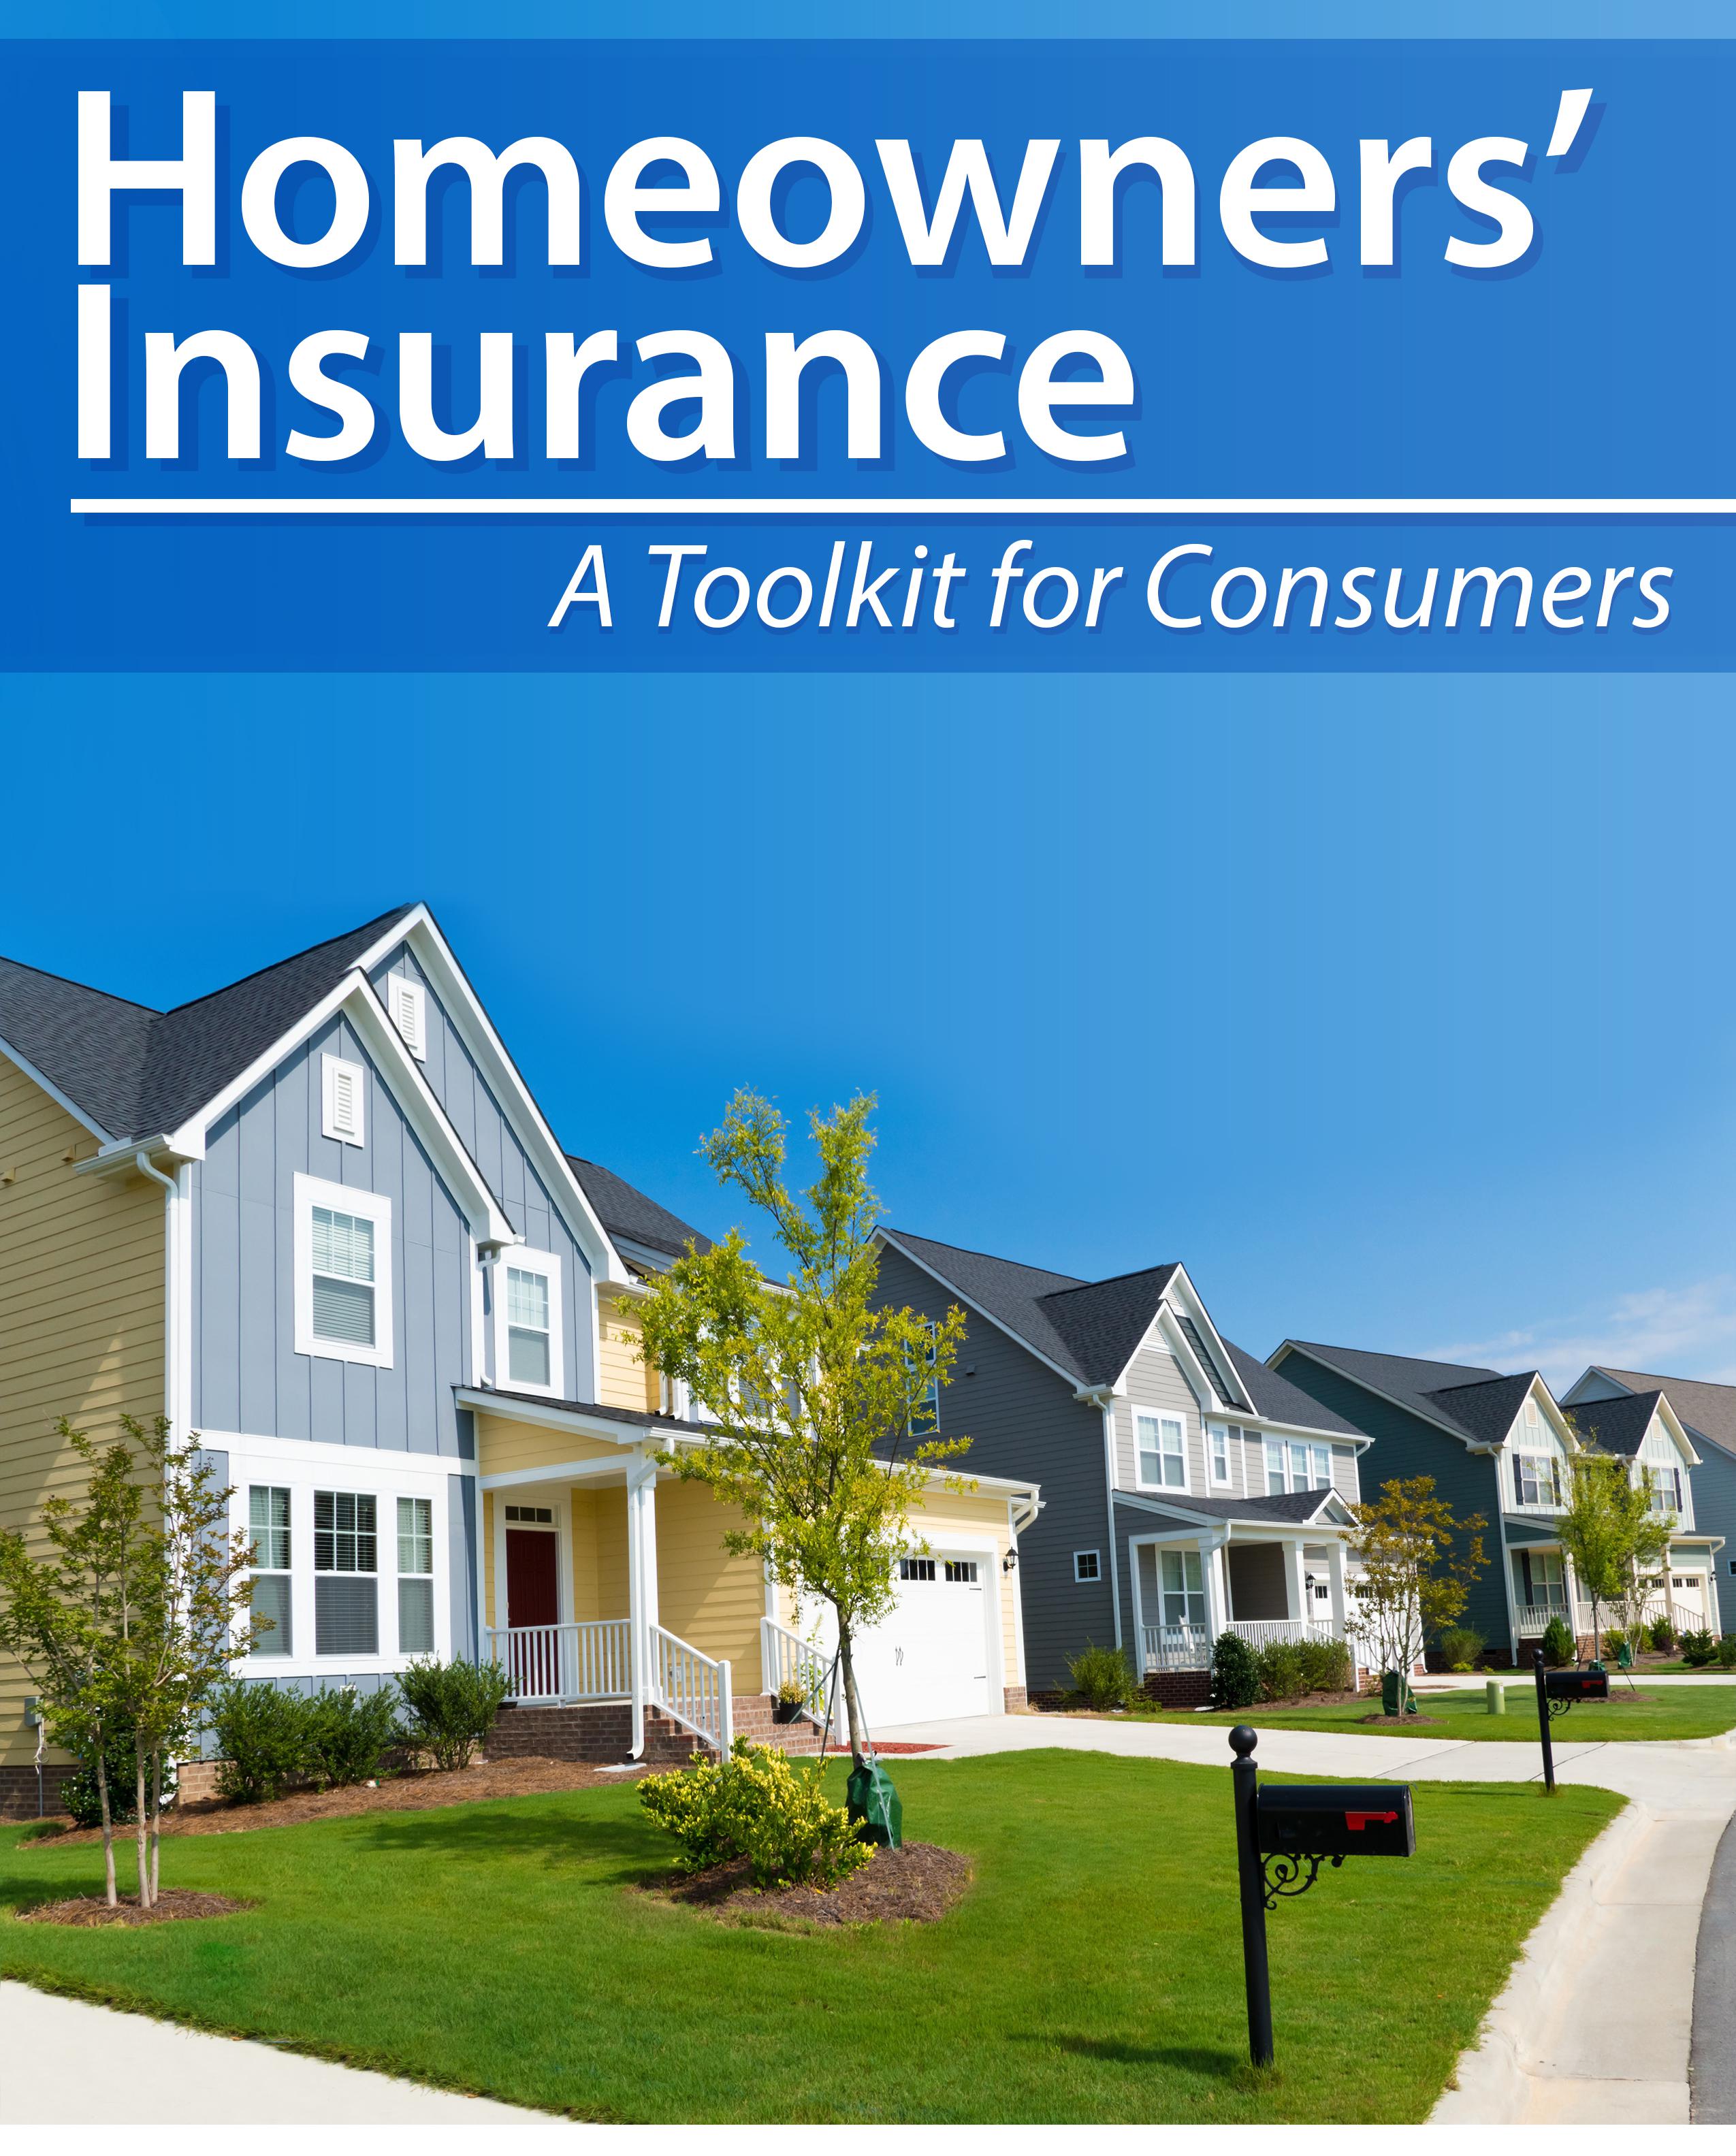 Homeowners' Insurance - A Toolkit For Consumers